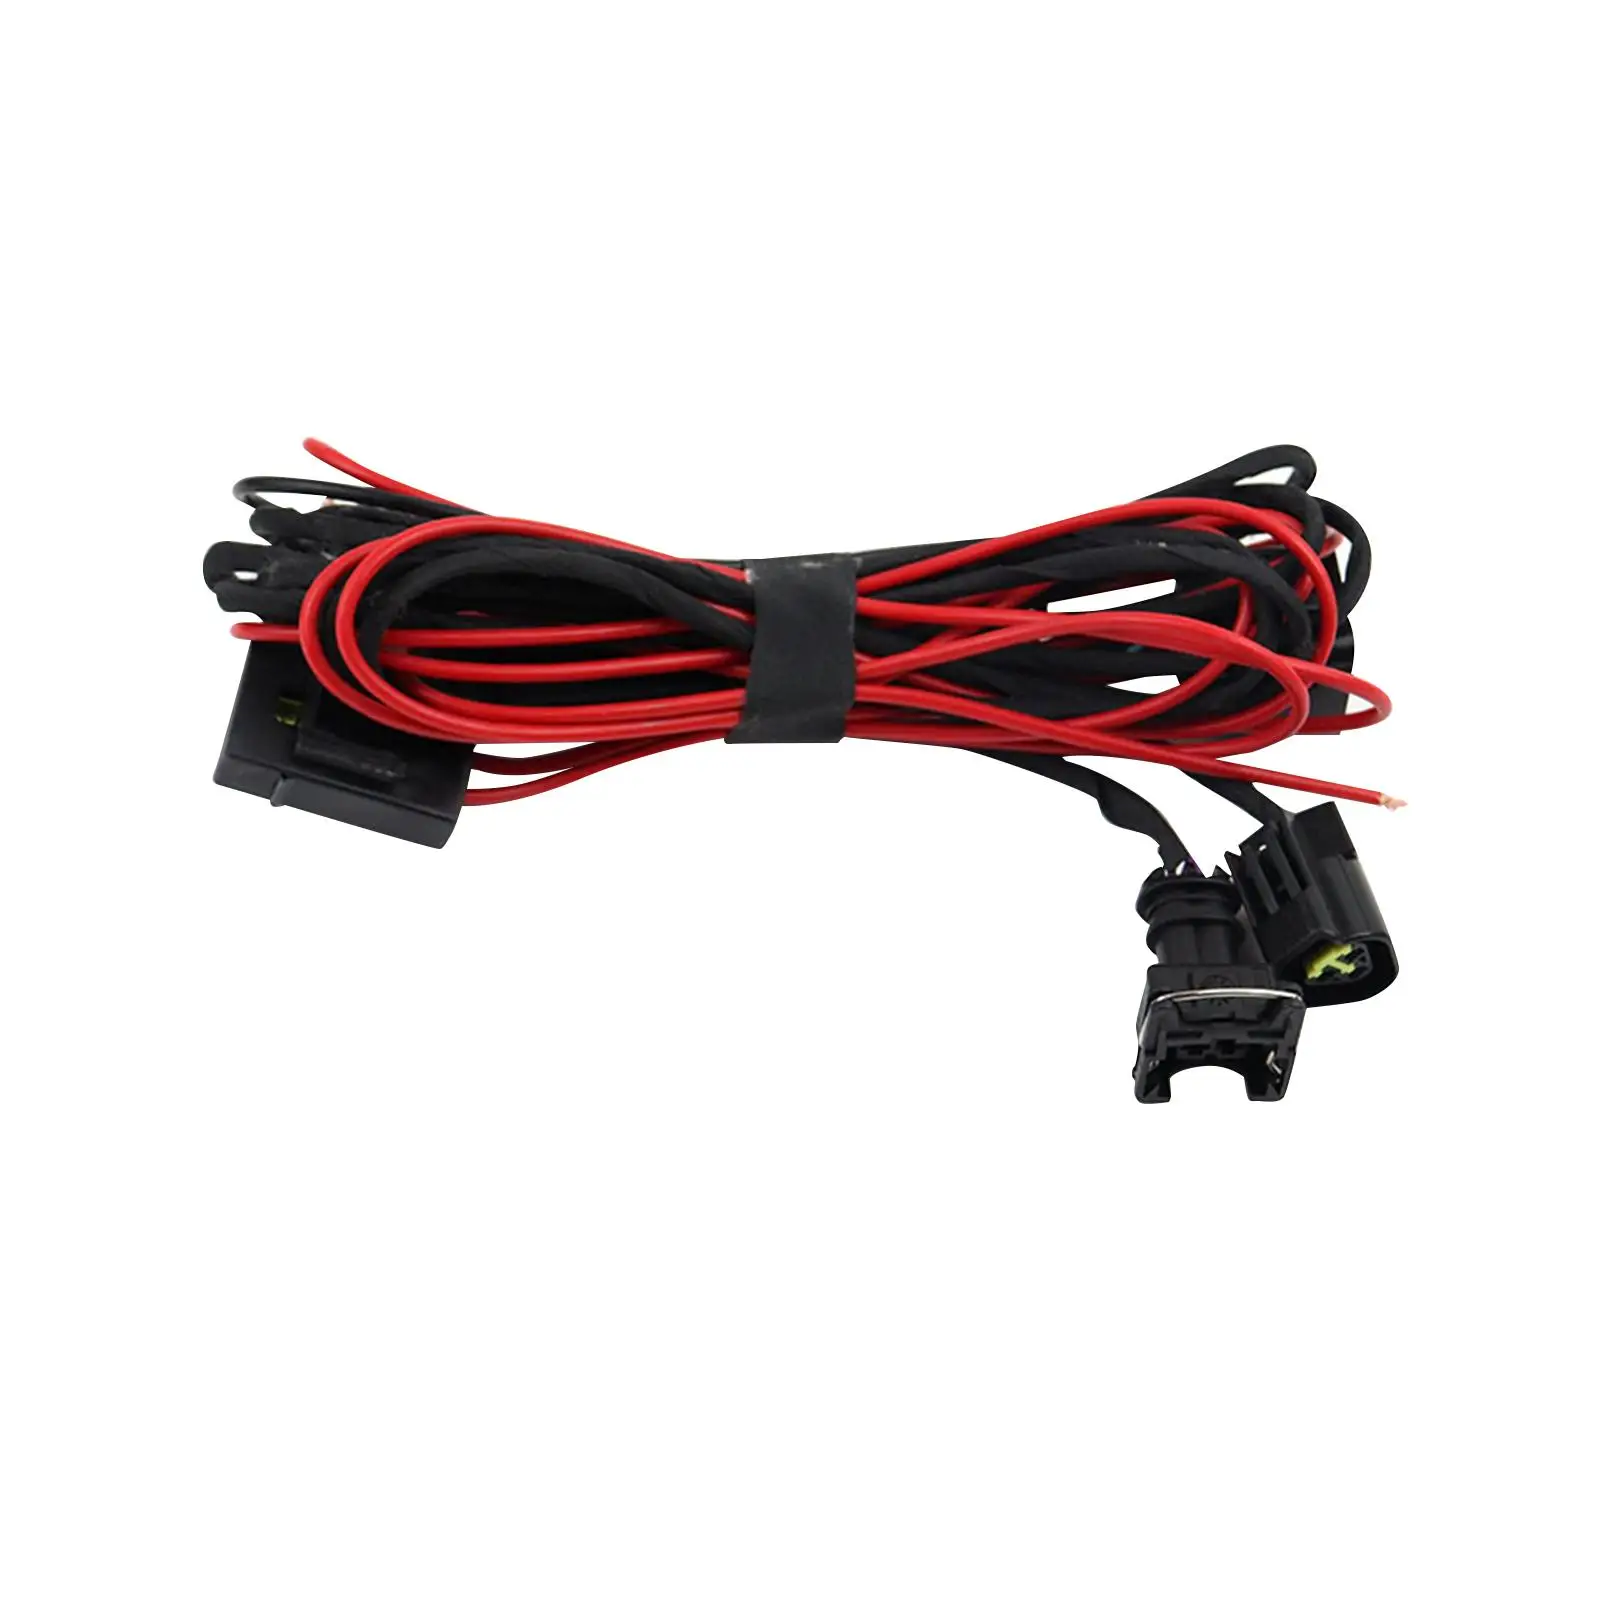 Diesel Heater Wiring Harness Replaces 12V 24V Separated Type Diesel Parking Heater Main Wire Harness for Campers Caravans